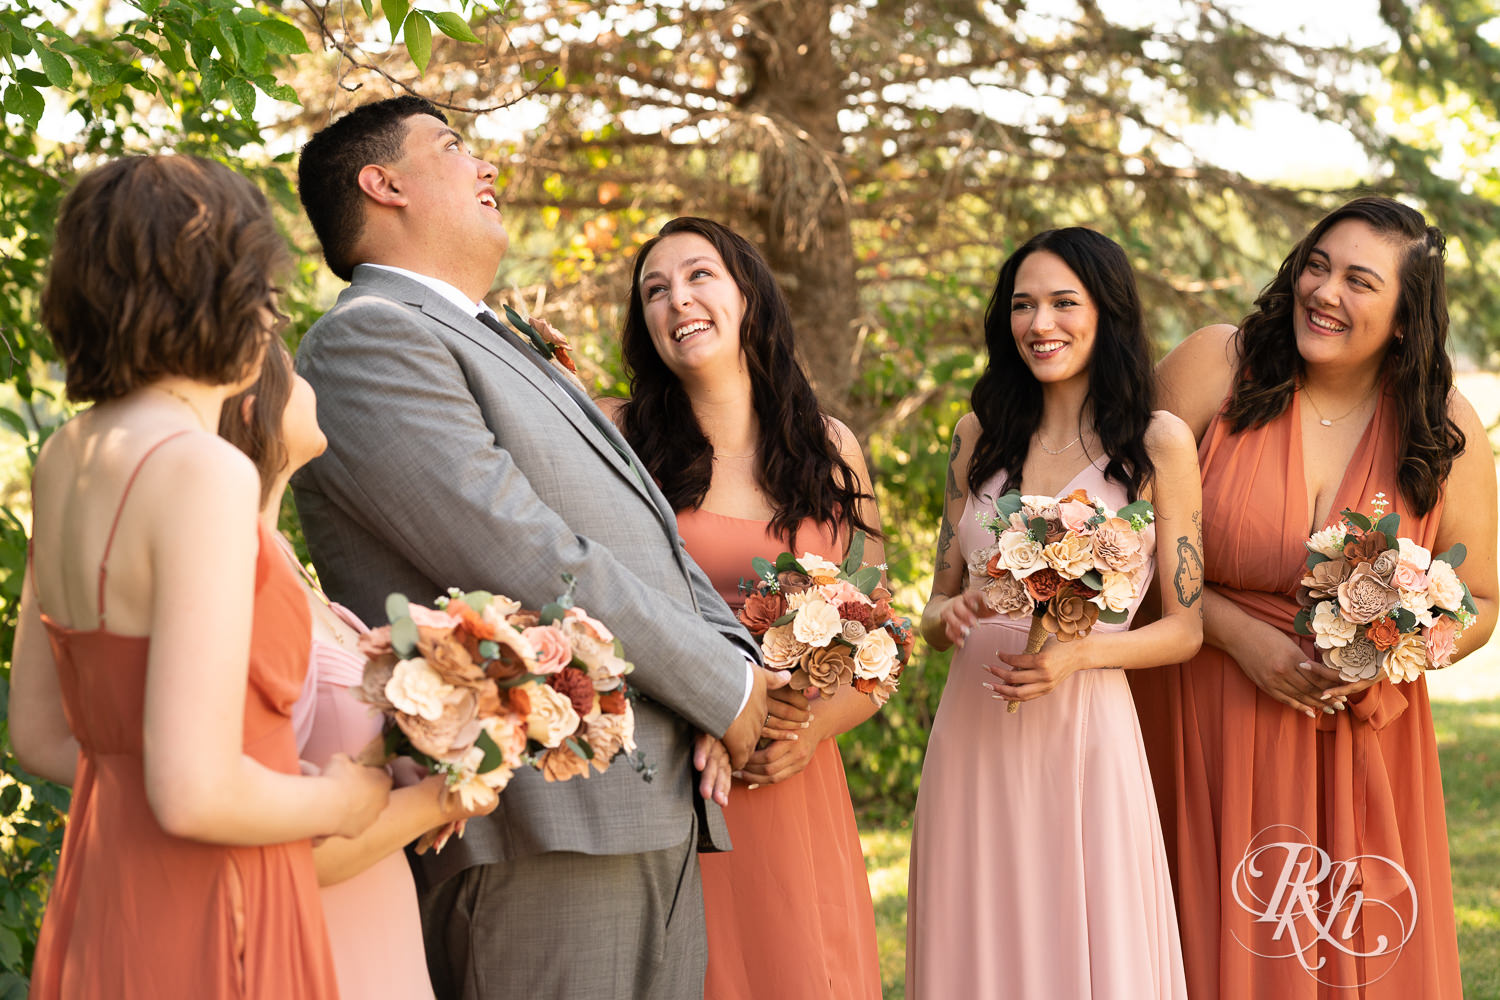 Bride and groom smile with wedding party at Cottage Farmhouse in Glencoe, Minnesota.